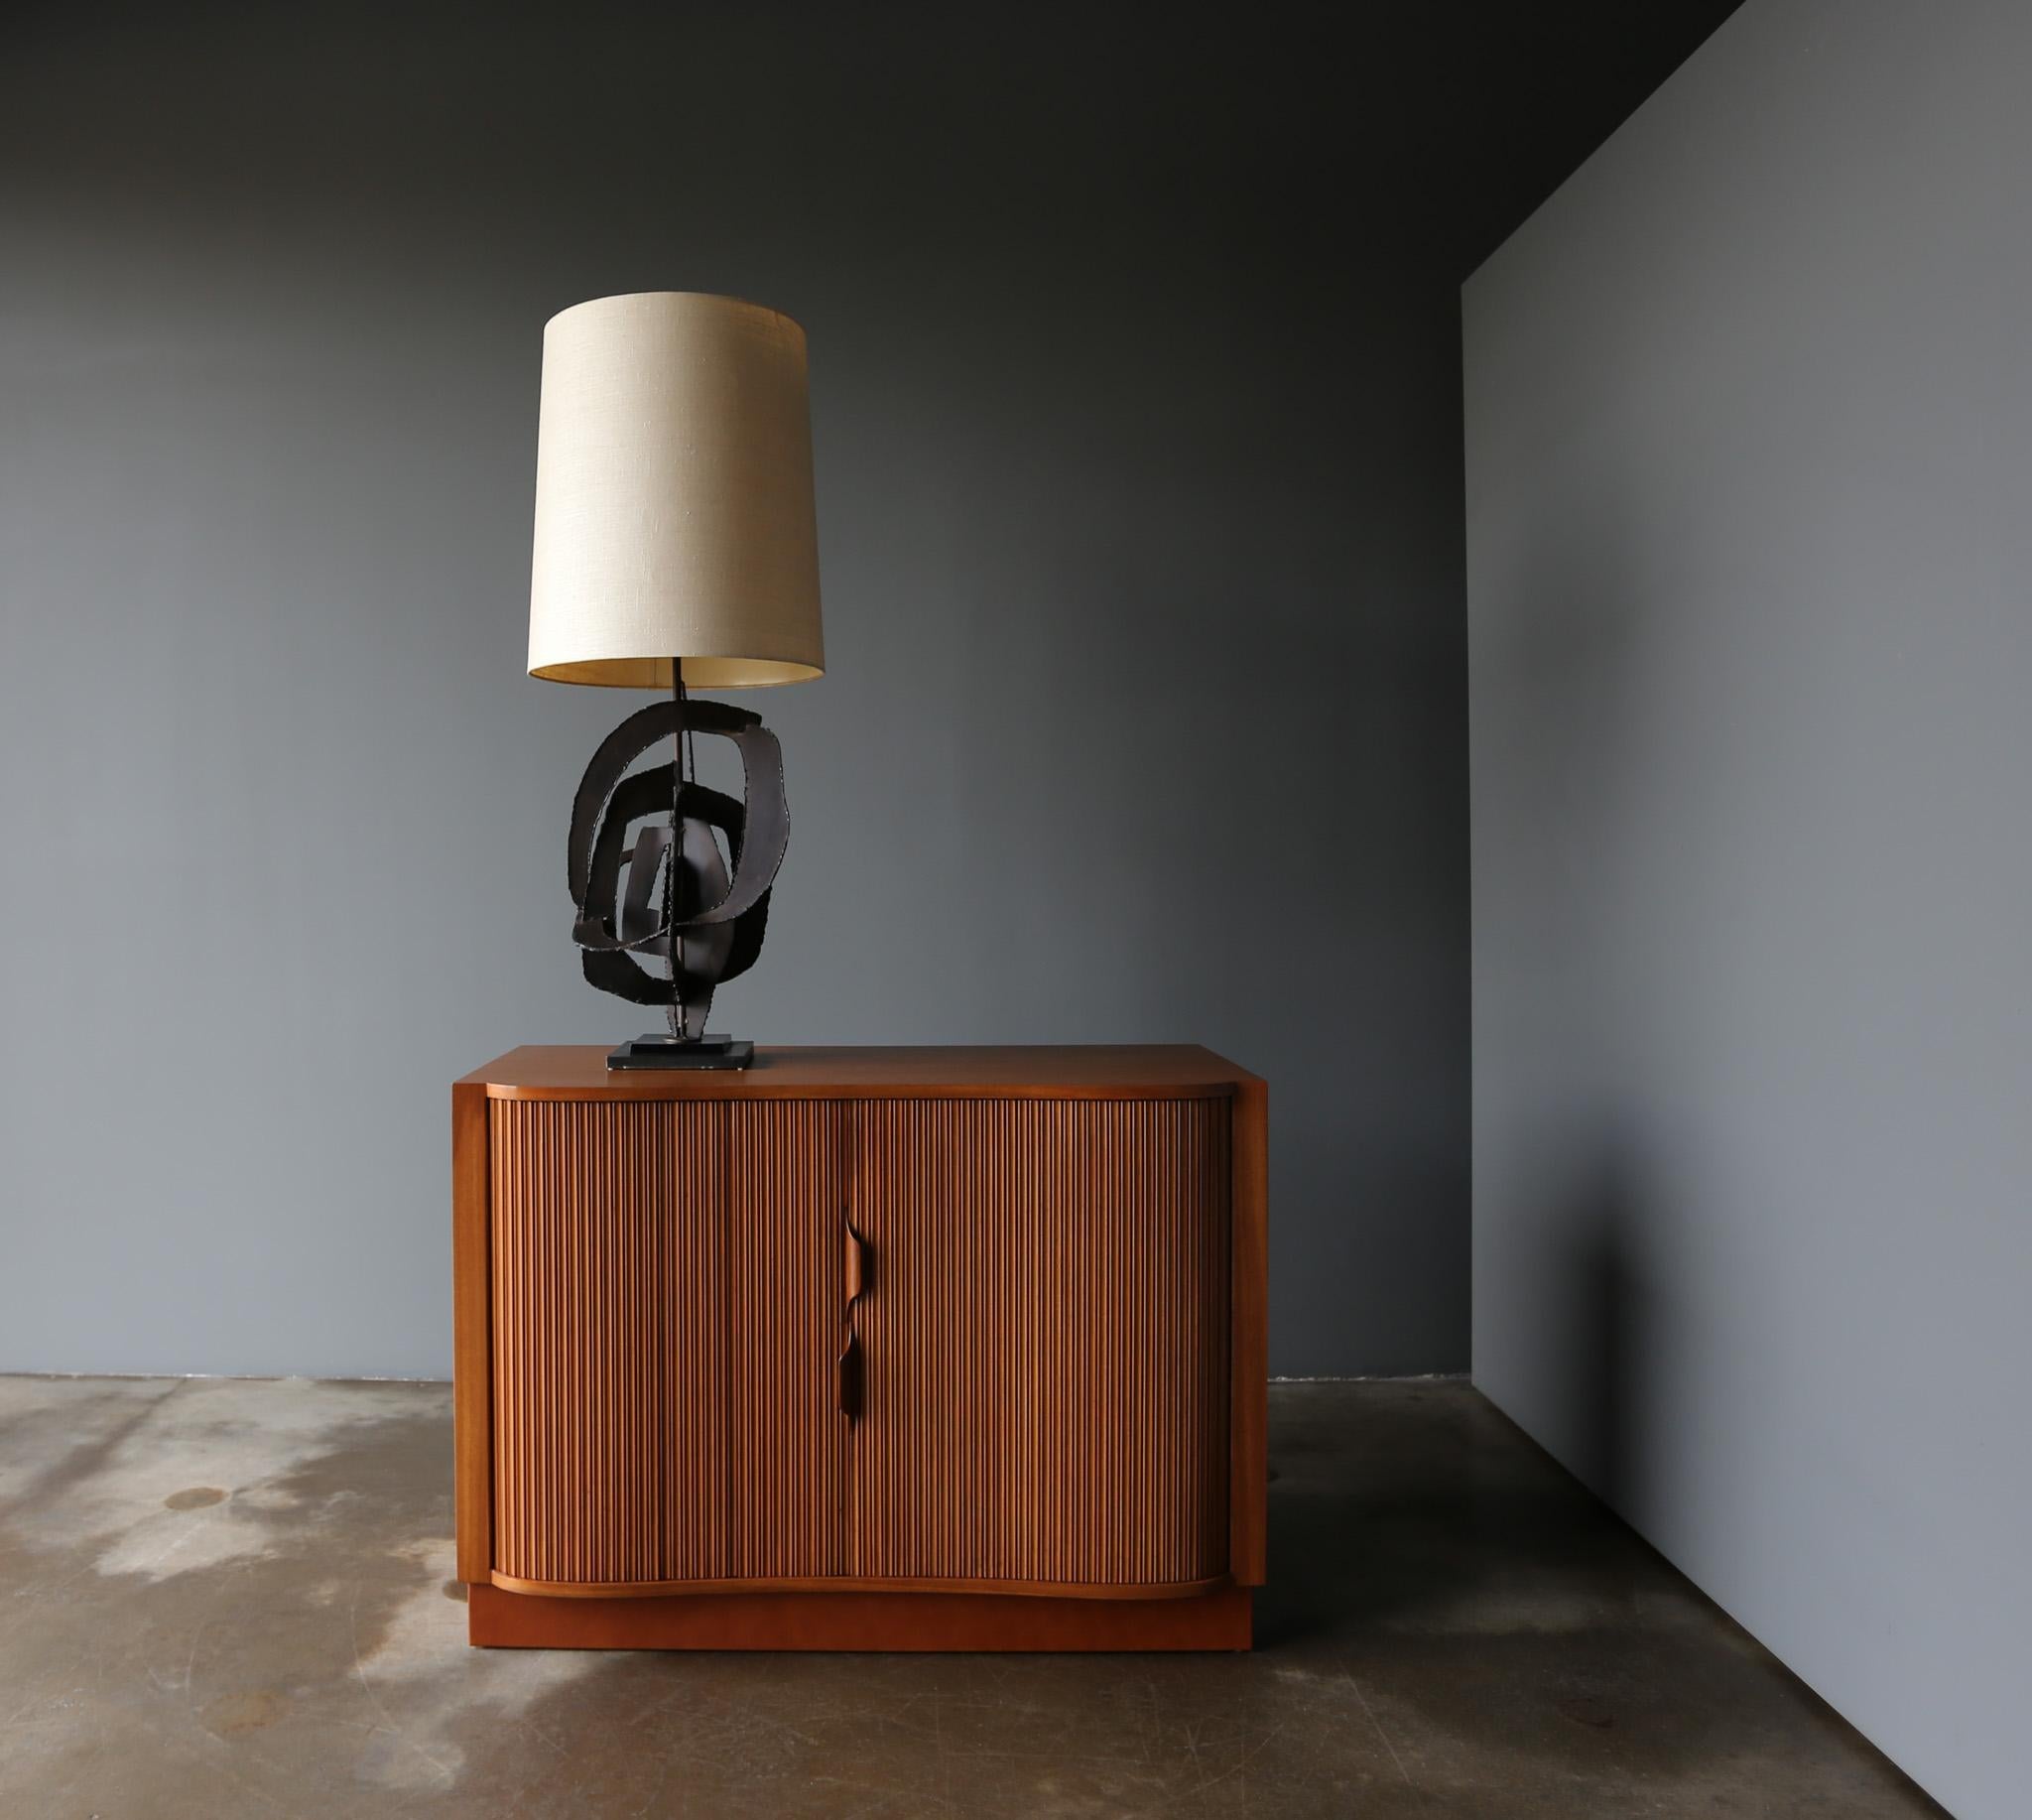 Welded Richard Barr Sculptural Table Lamp for the STUDIO Collection by Laurel, c.1965 For Sale